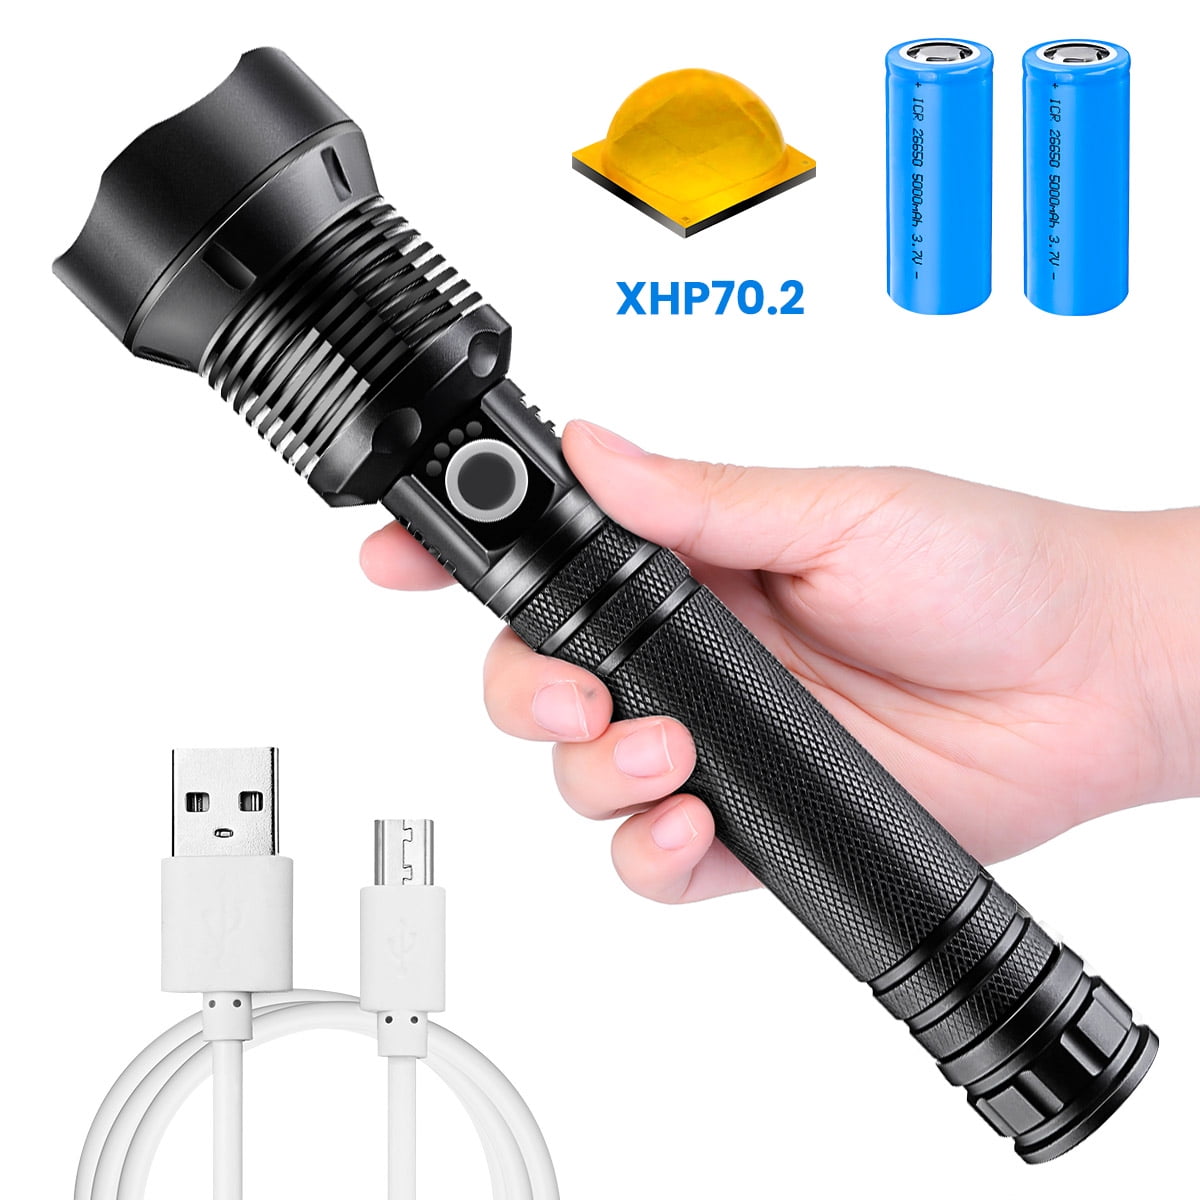 Portable LED Flashlight, 5.5 Inch Mini Best Super Bright Camping  Accessories, Outdoor Gear, Battery-Powered Handheld High Lumens Pocket  Waterproof